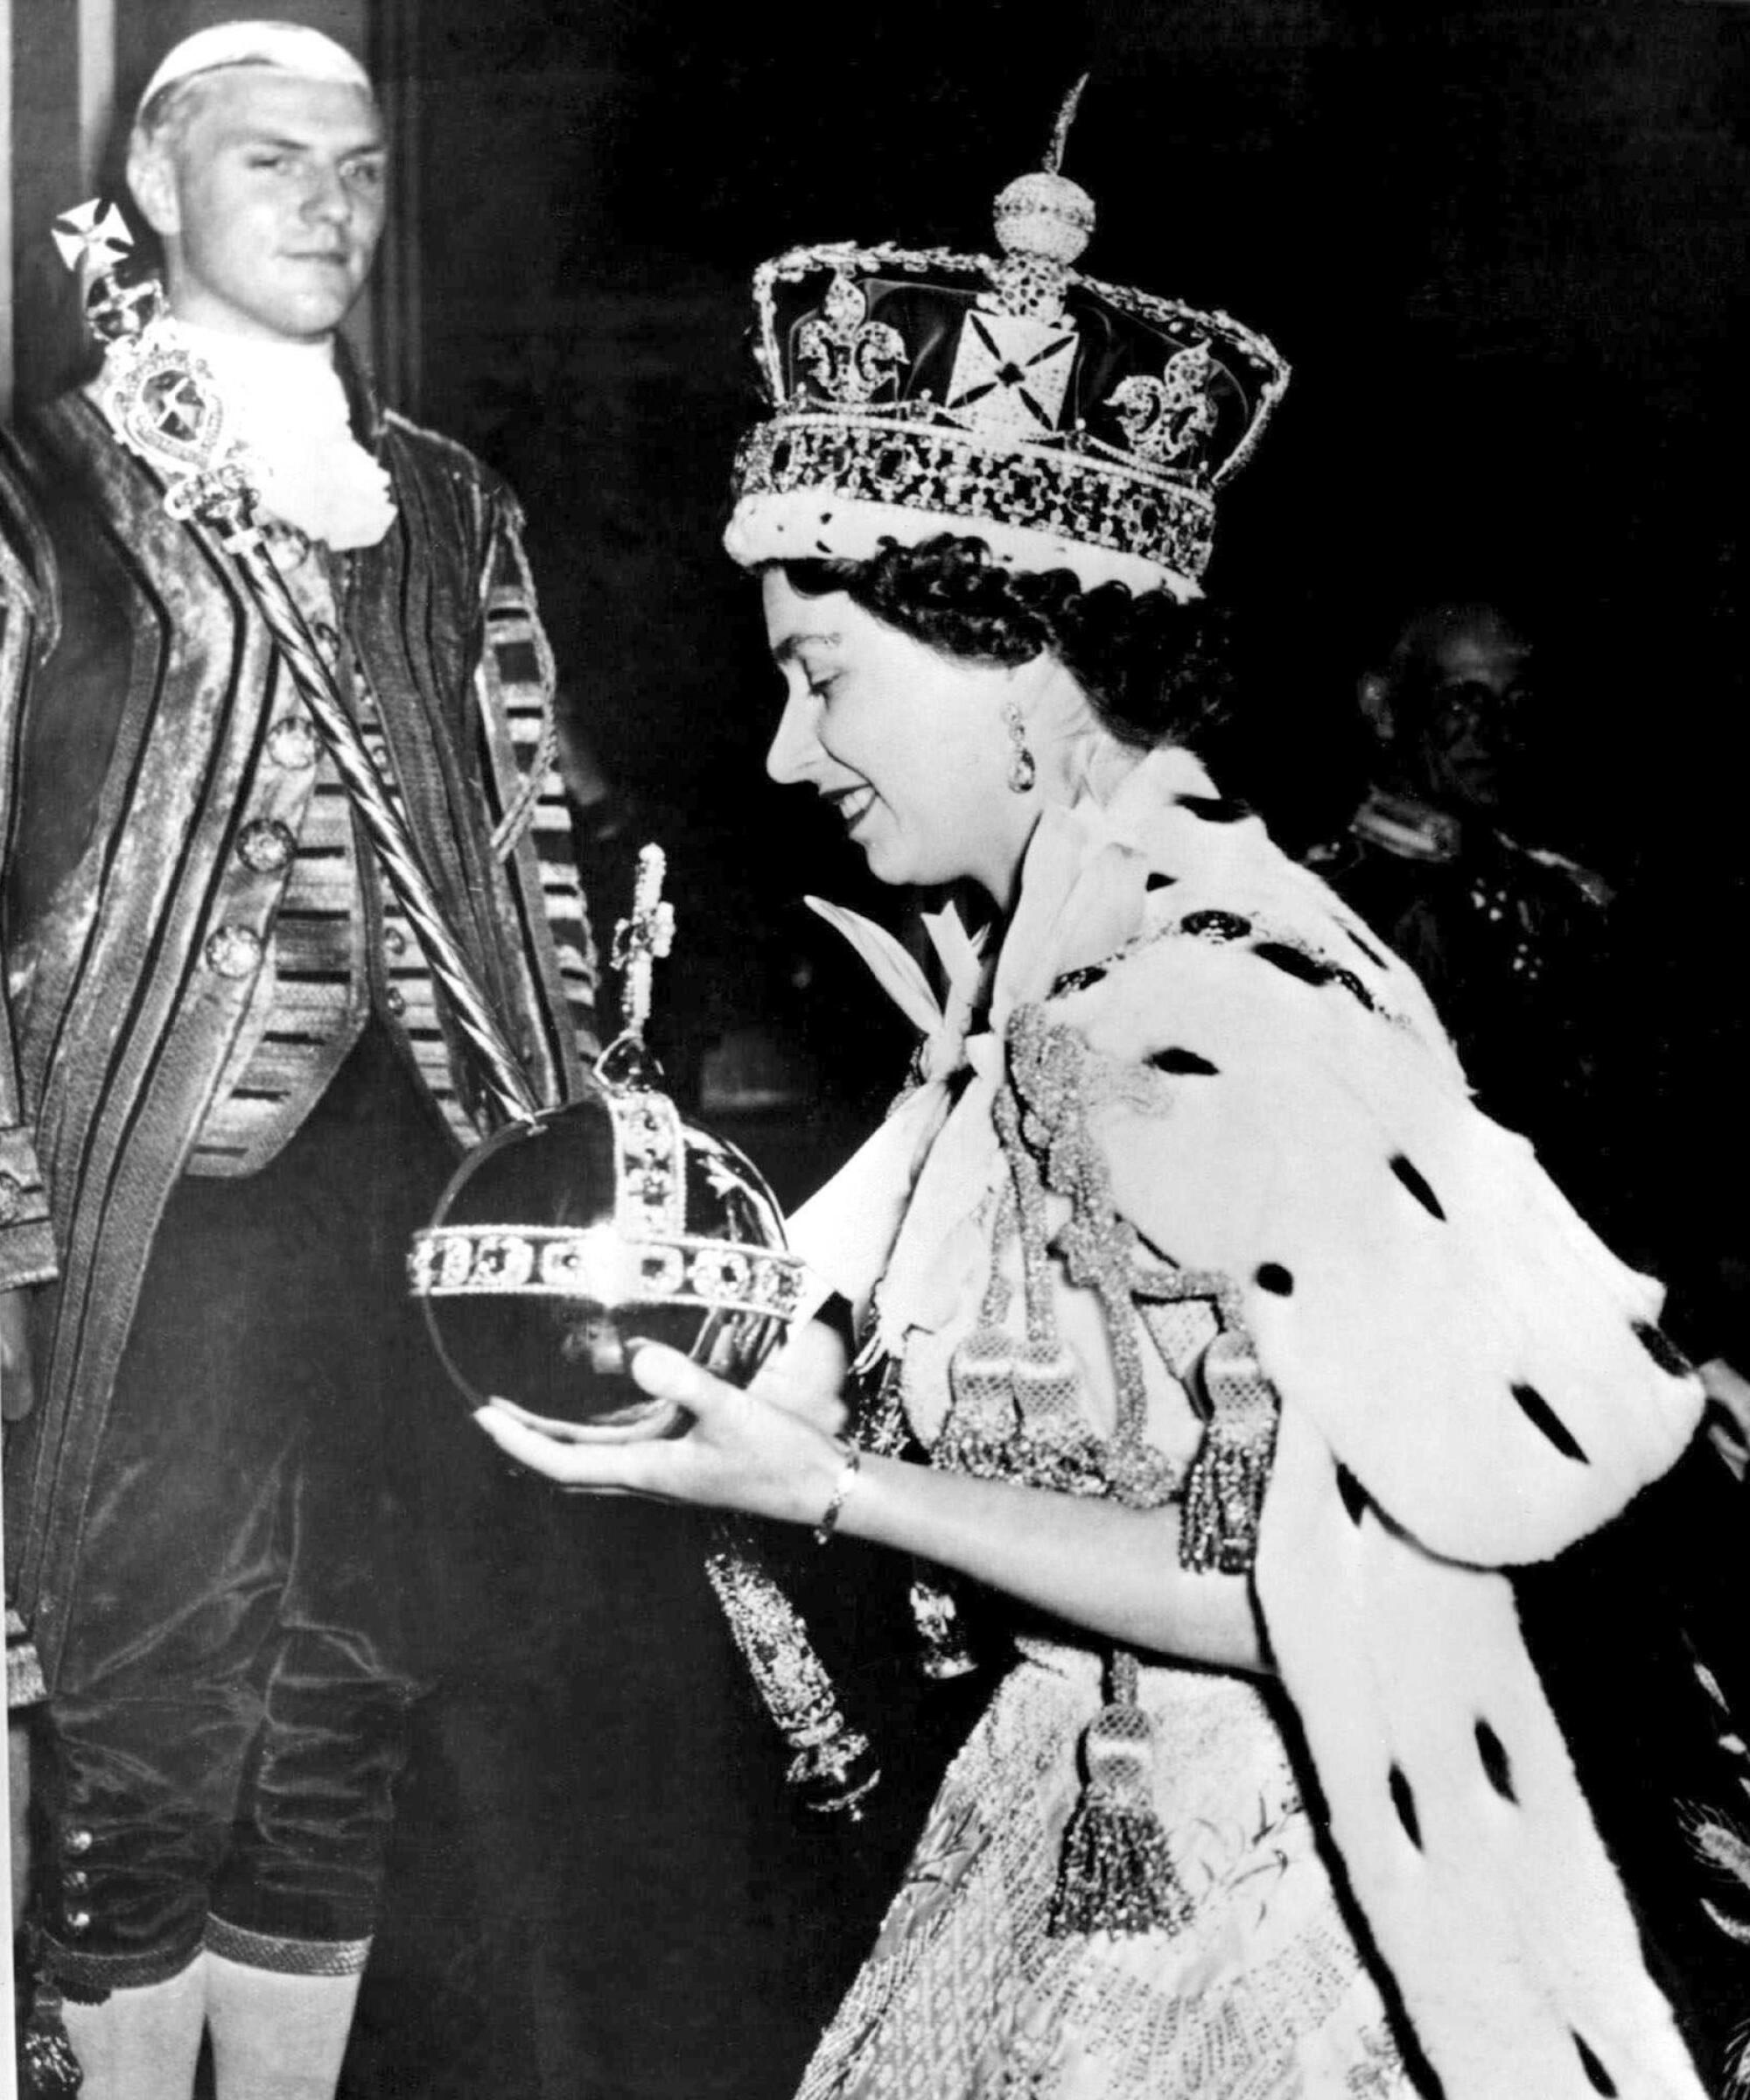 Queen Elizabeth II in a black-and-white photo wearing a large crown and carrying the Orb and Scepter